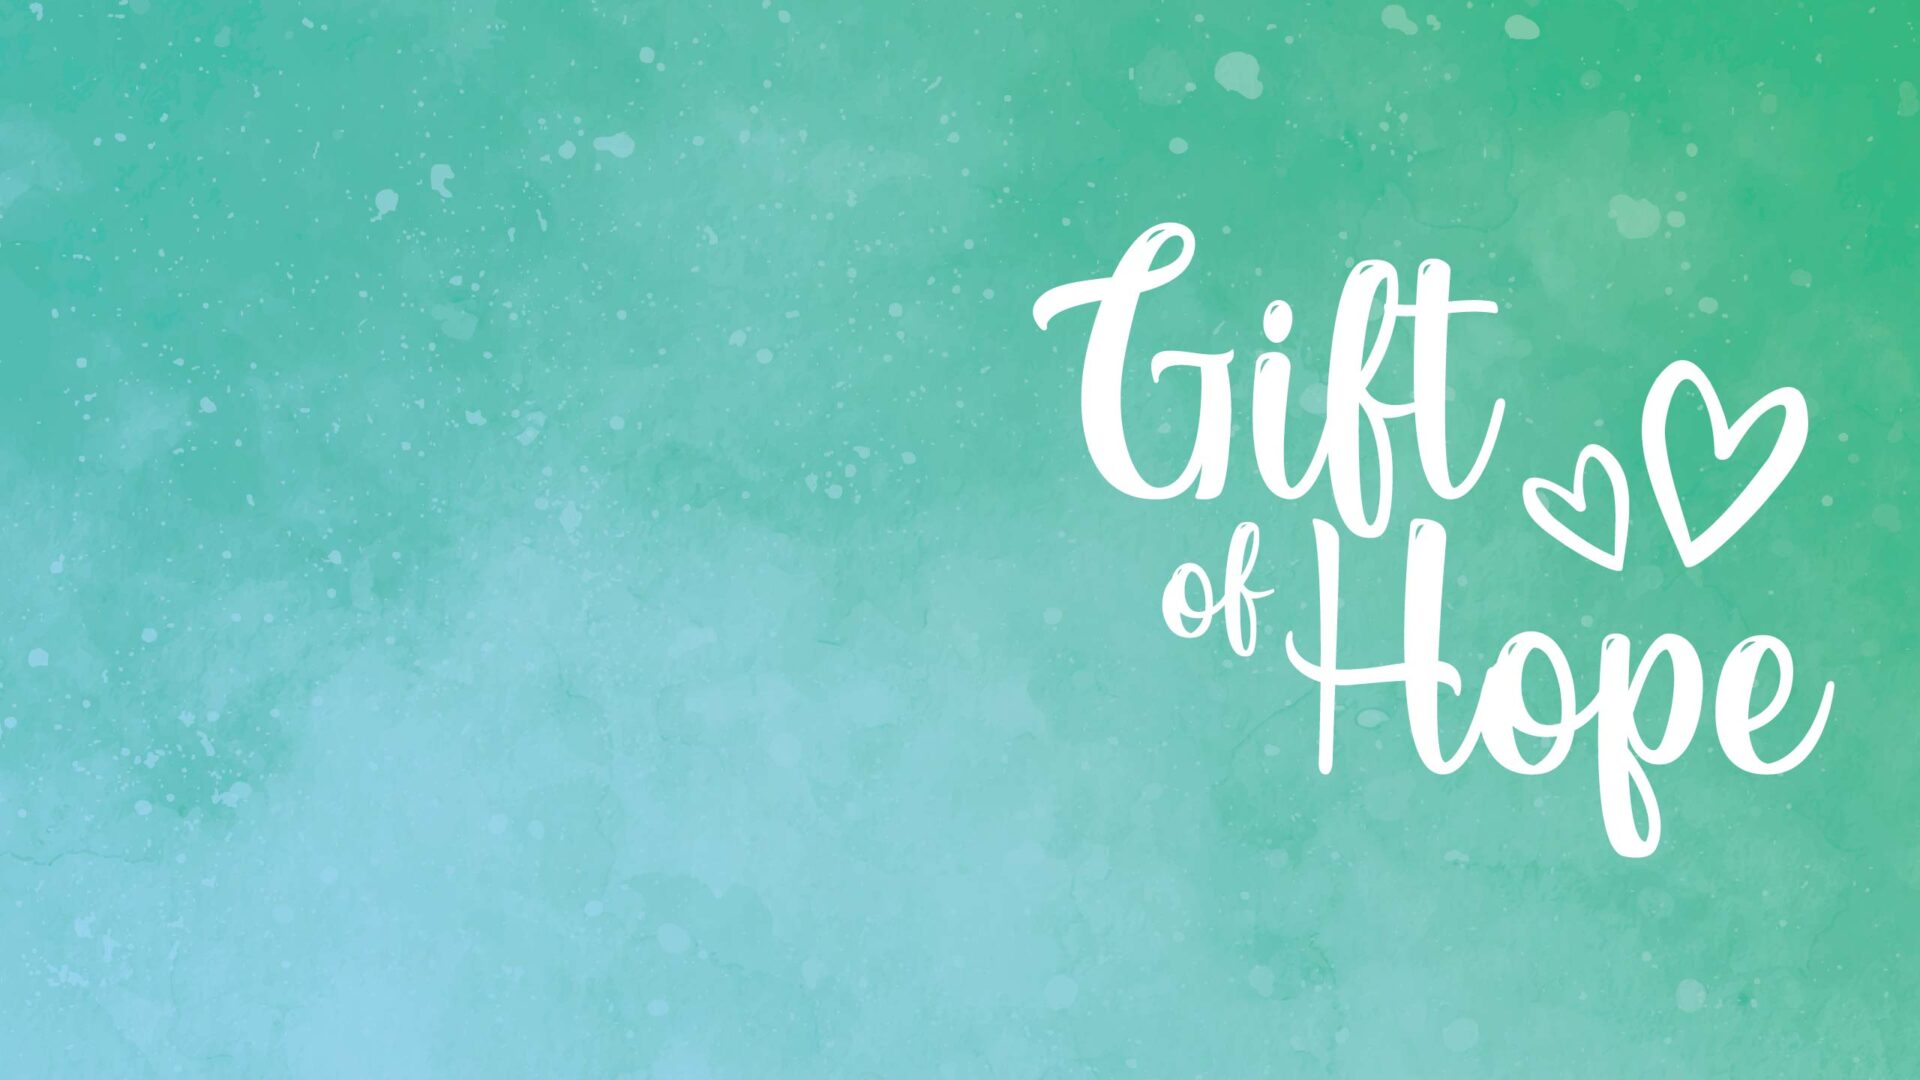 Give the Gift of Hope this Holiday Season